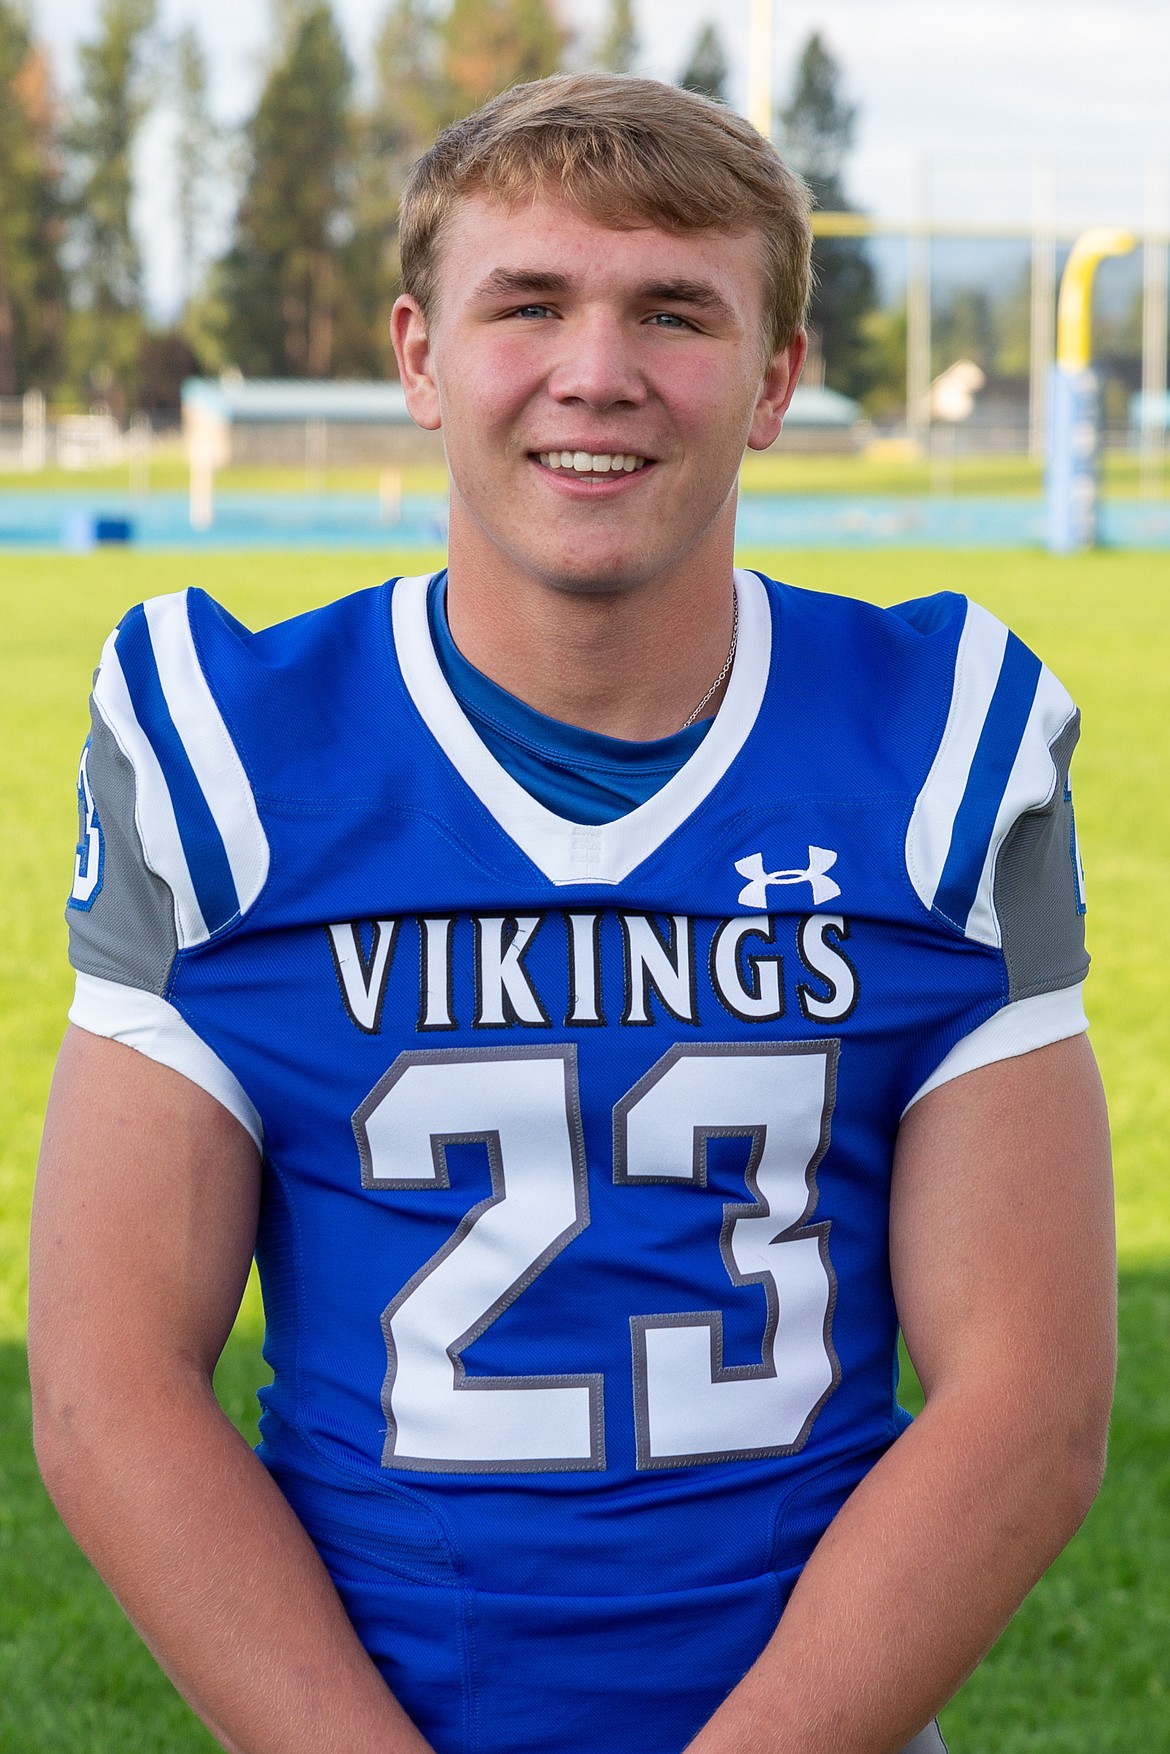 Courtesy photo
Sophomore running back Gunner Giulio is this week&#146;s Coeur d&#146;Alene High School Nosworthy&#146;s Hall of Fame Offensive Player of the Week. Giulio caught three passes for 32 yards and rushed five times for 59 yards, including a 42-yard touchdown in last week&#146;s game at Highland.